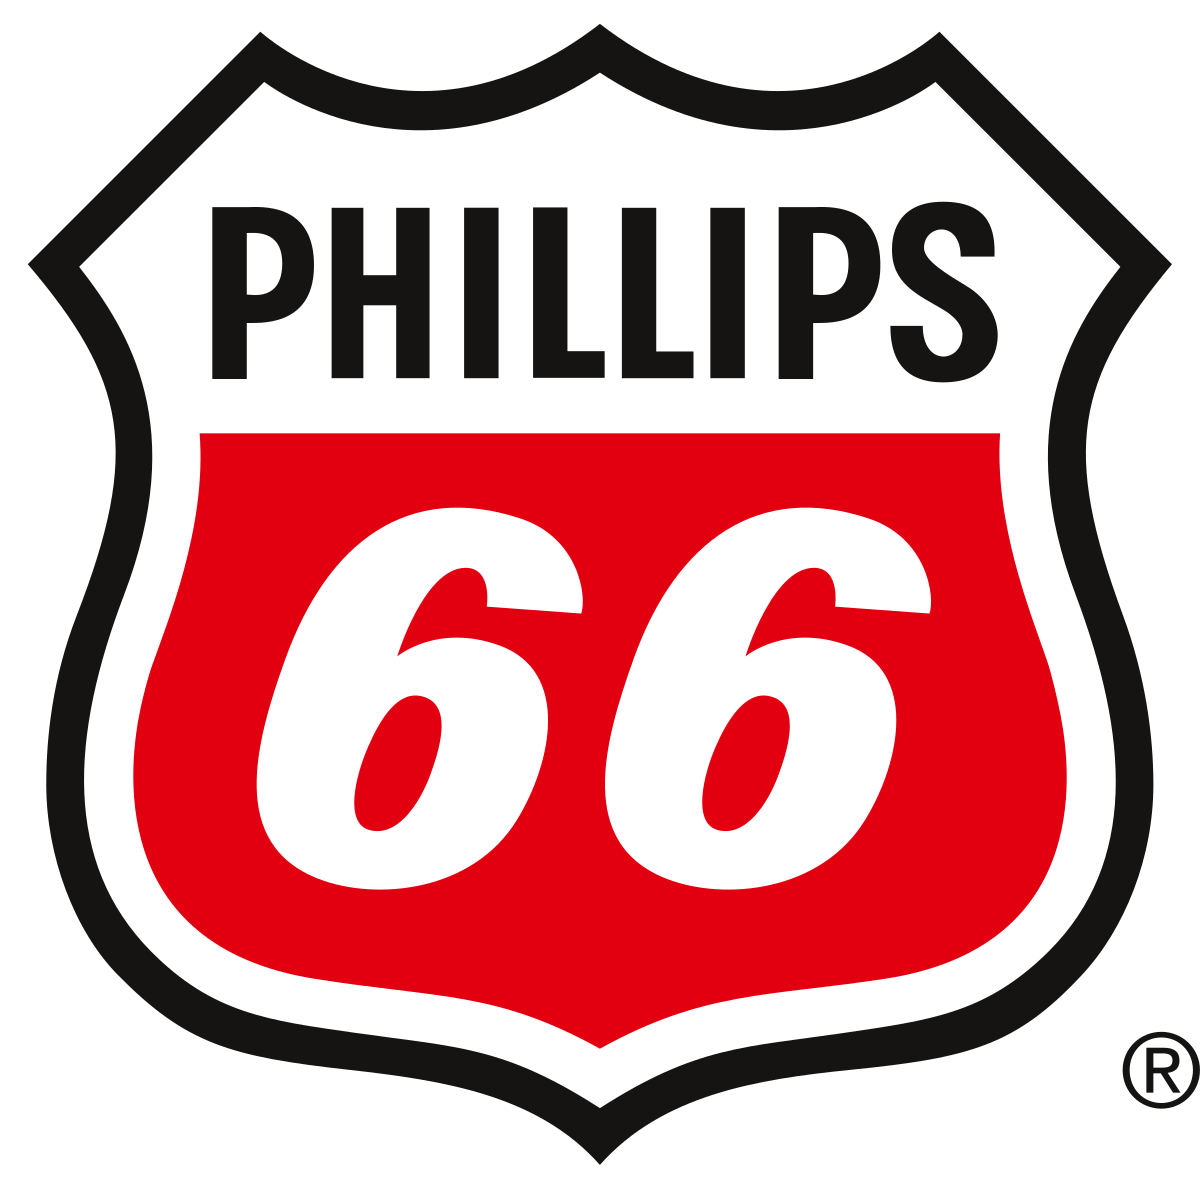 Phillips 66 logo, depicted with the numbers '66' and a shield design.